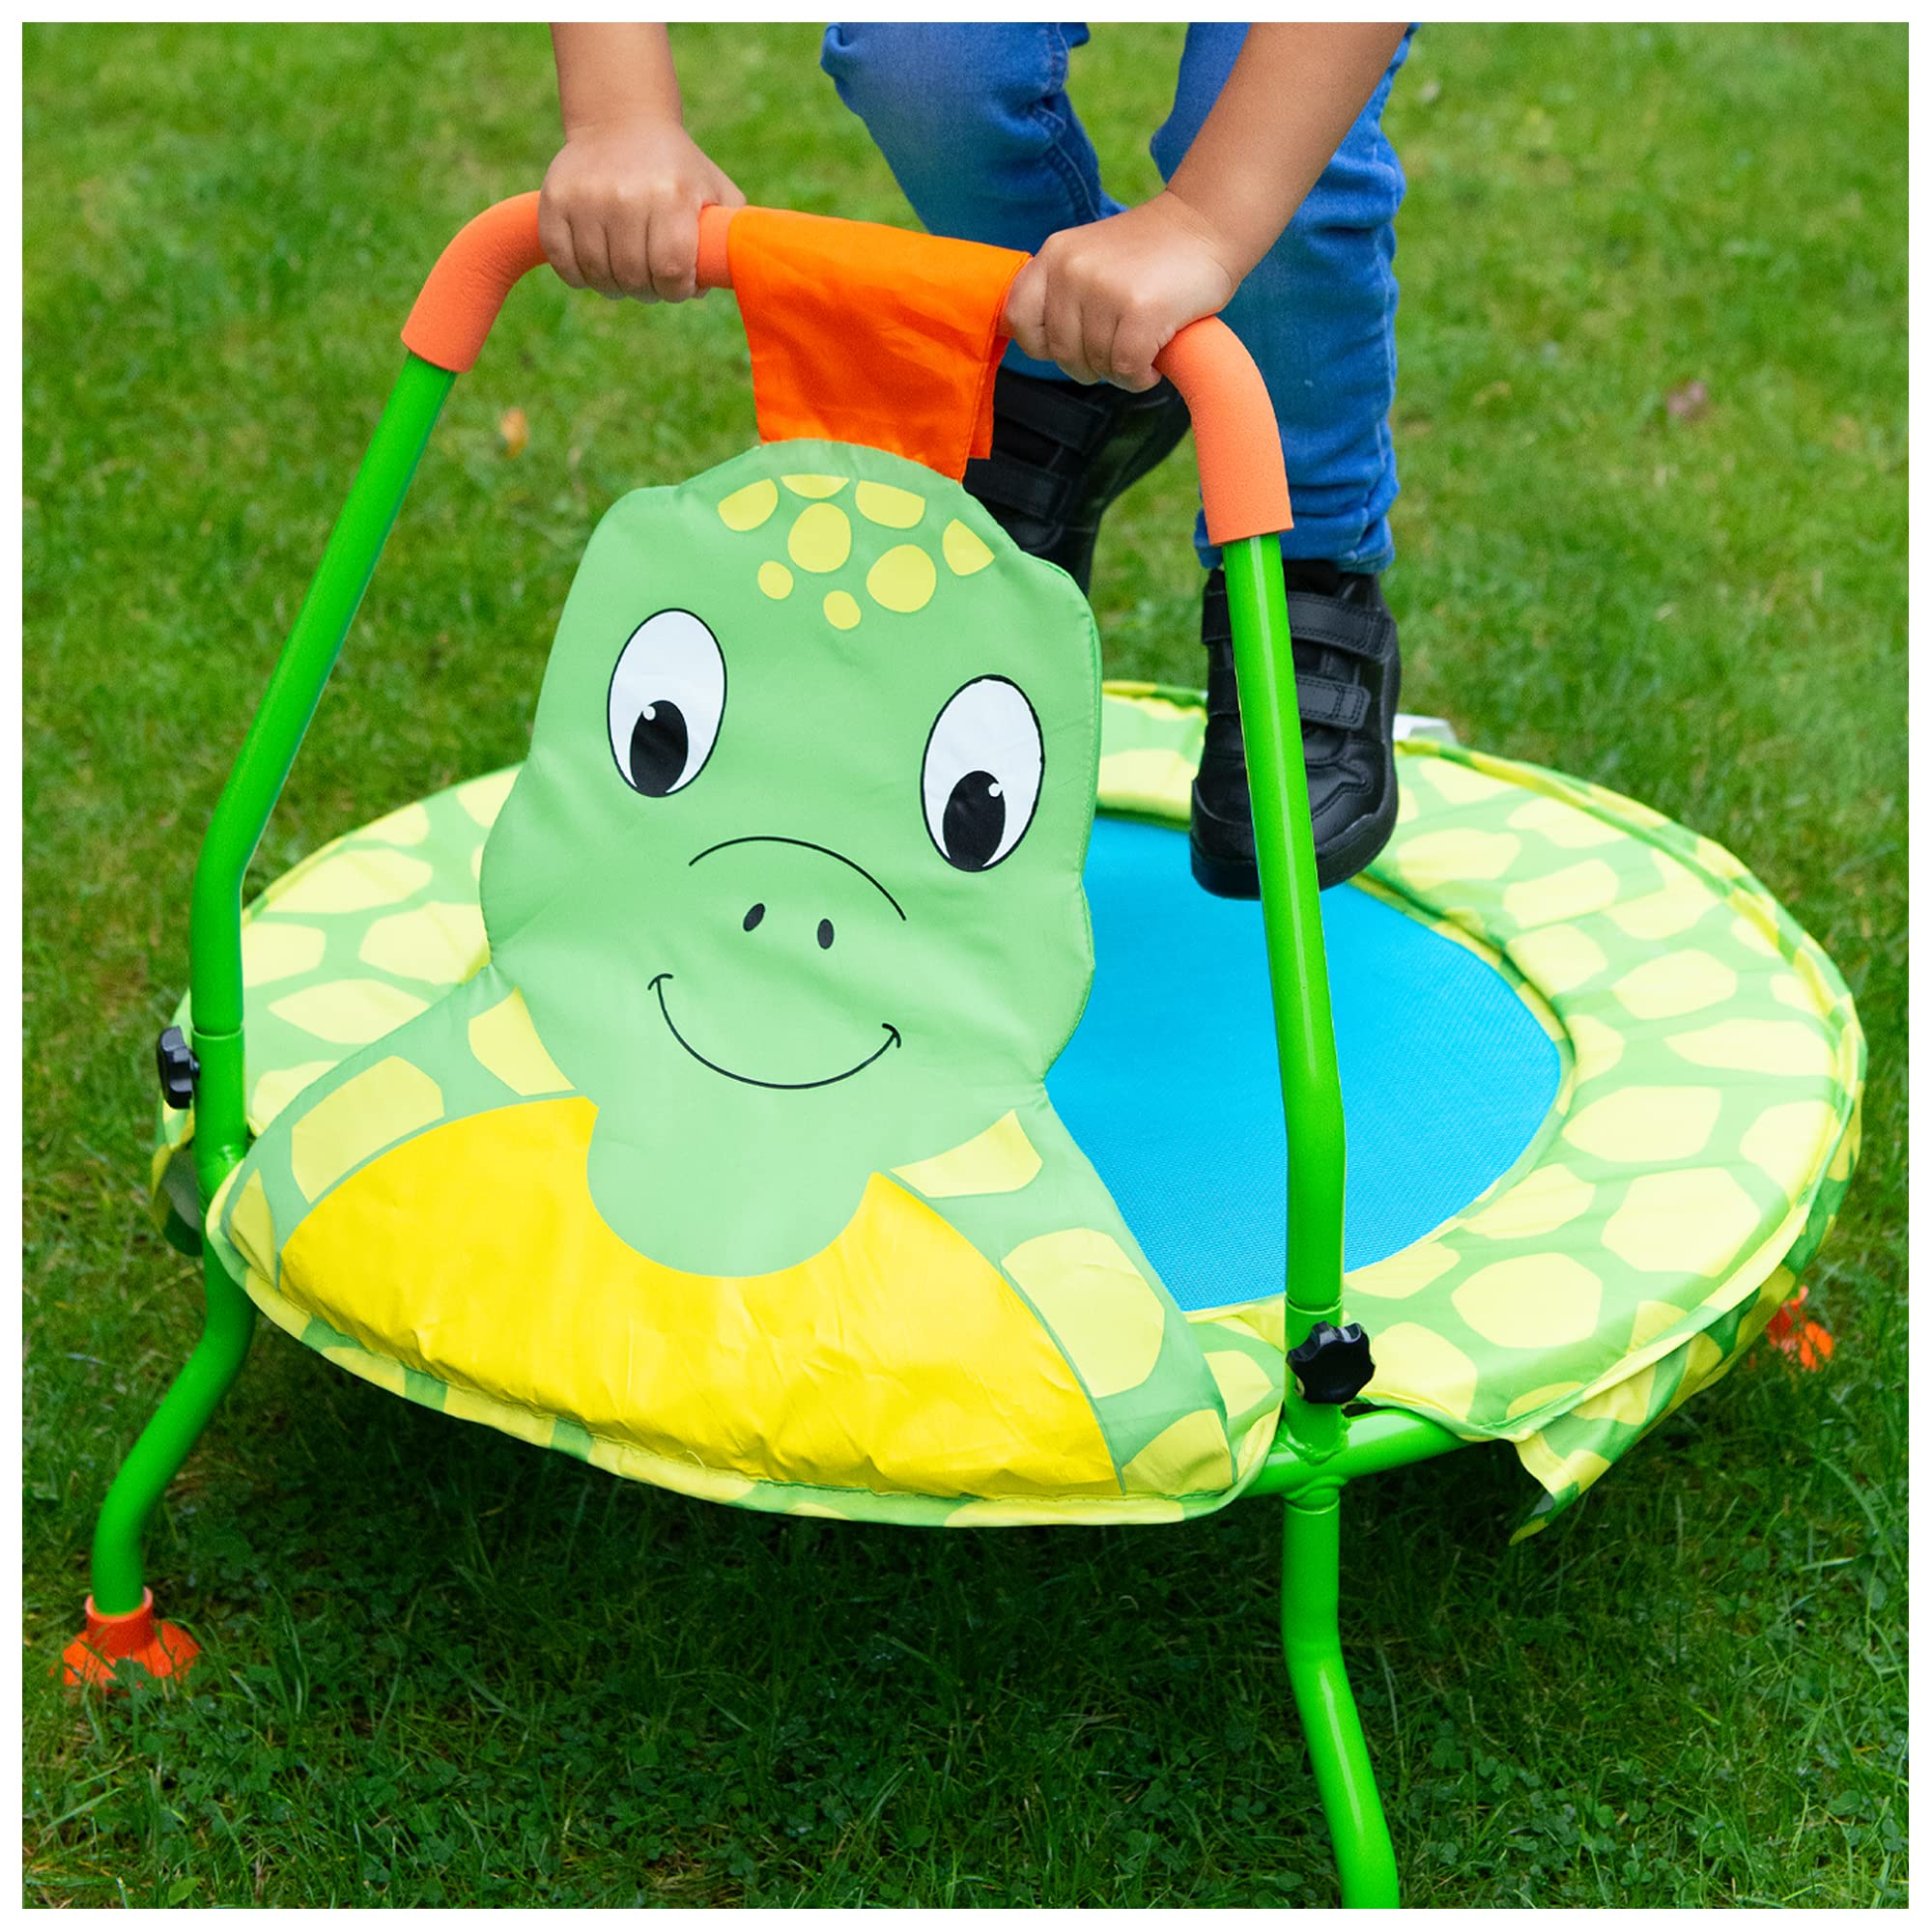 Galt Toys, Nursery Trampoline - Turtle, Trampolines for Kids, Ages 1 Year Plus